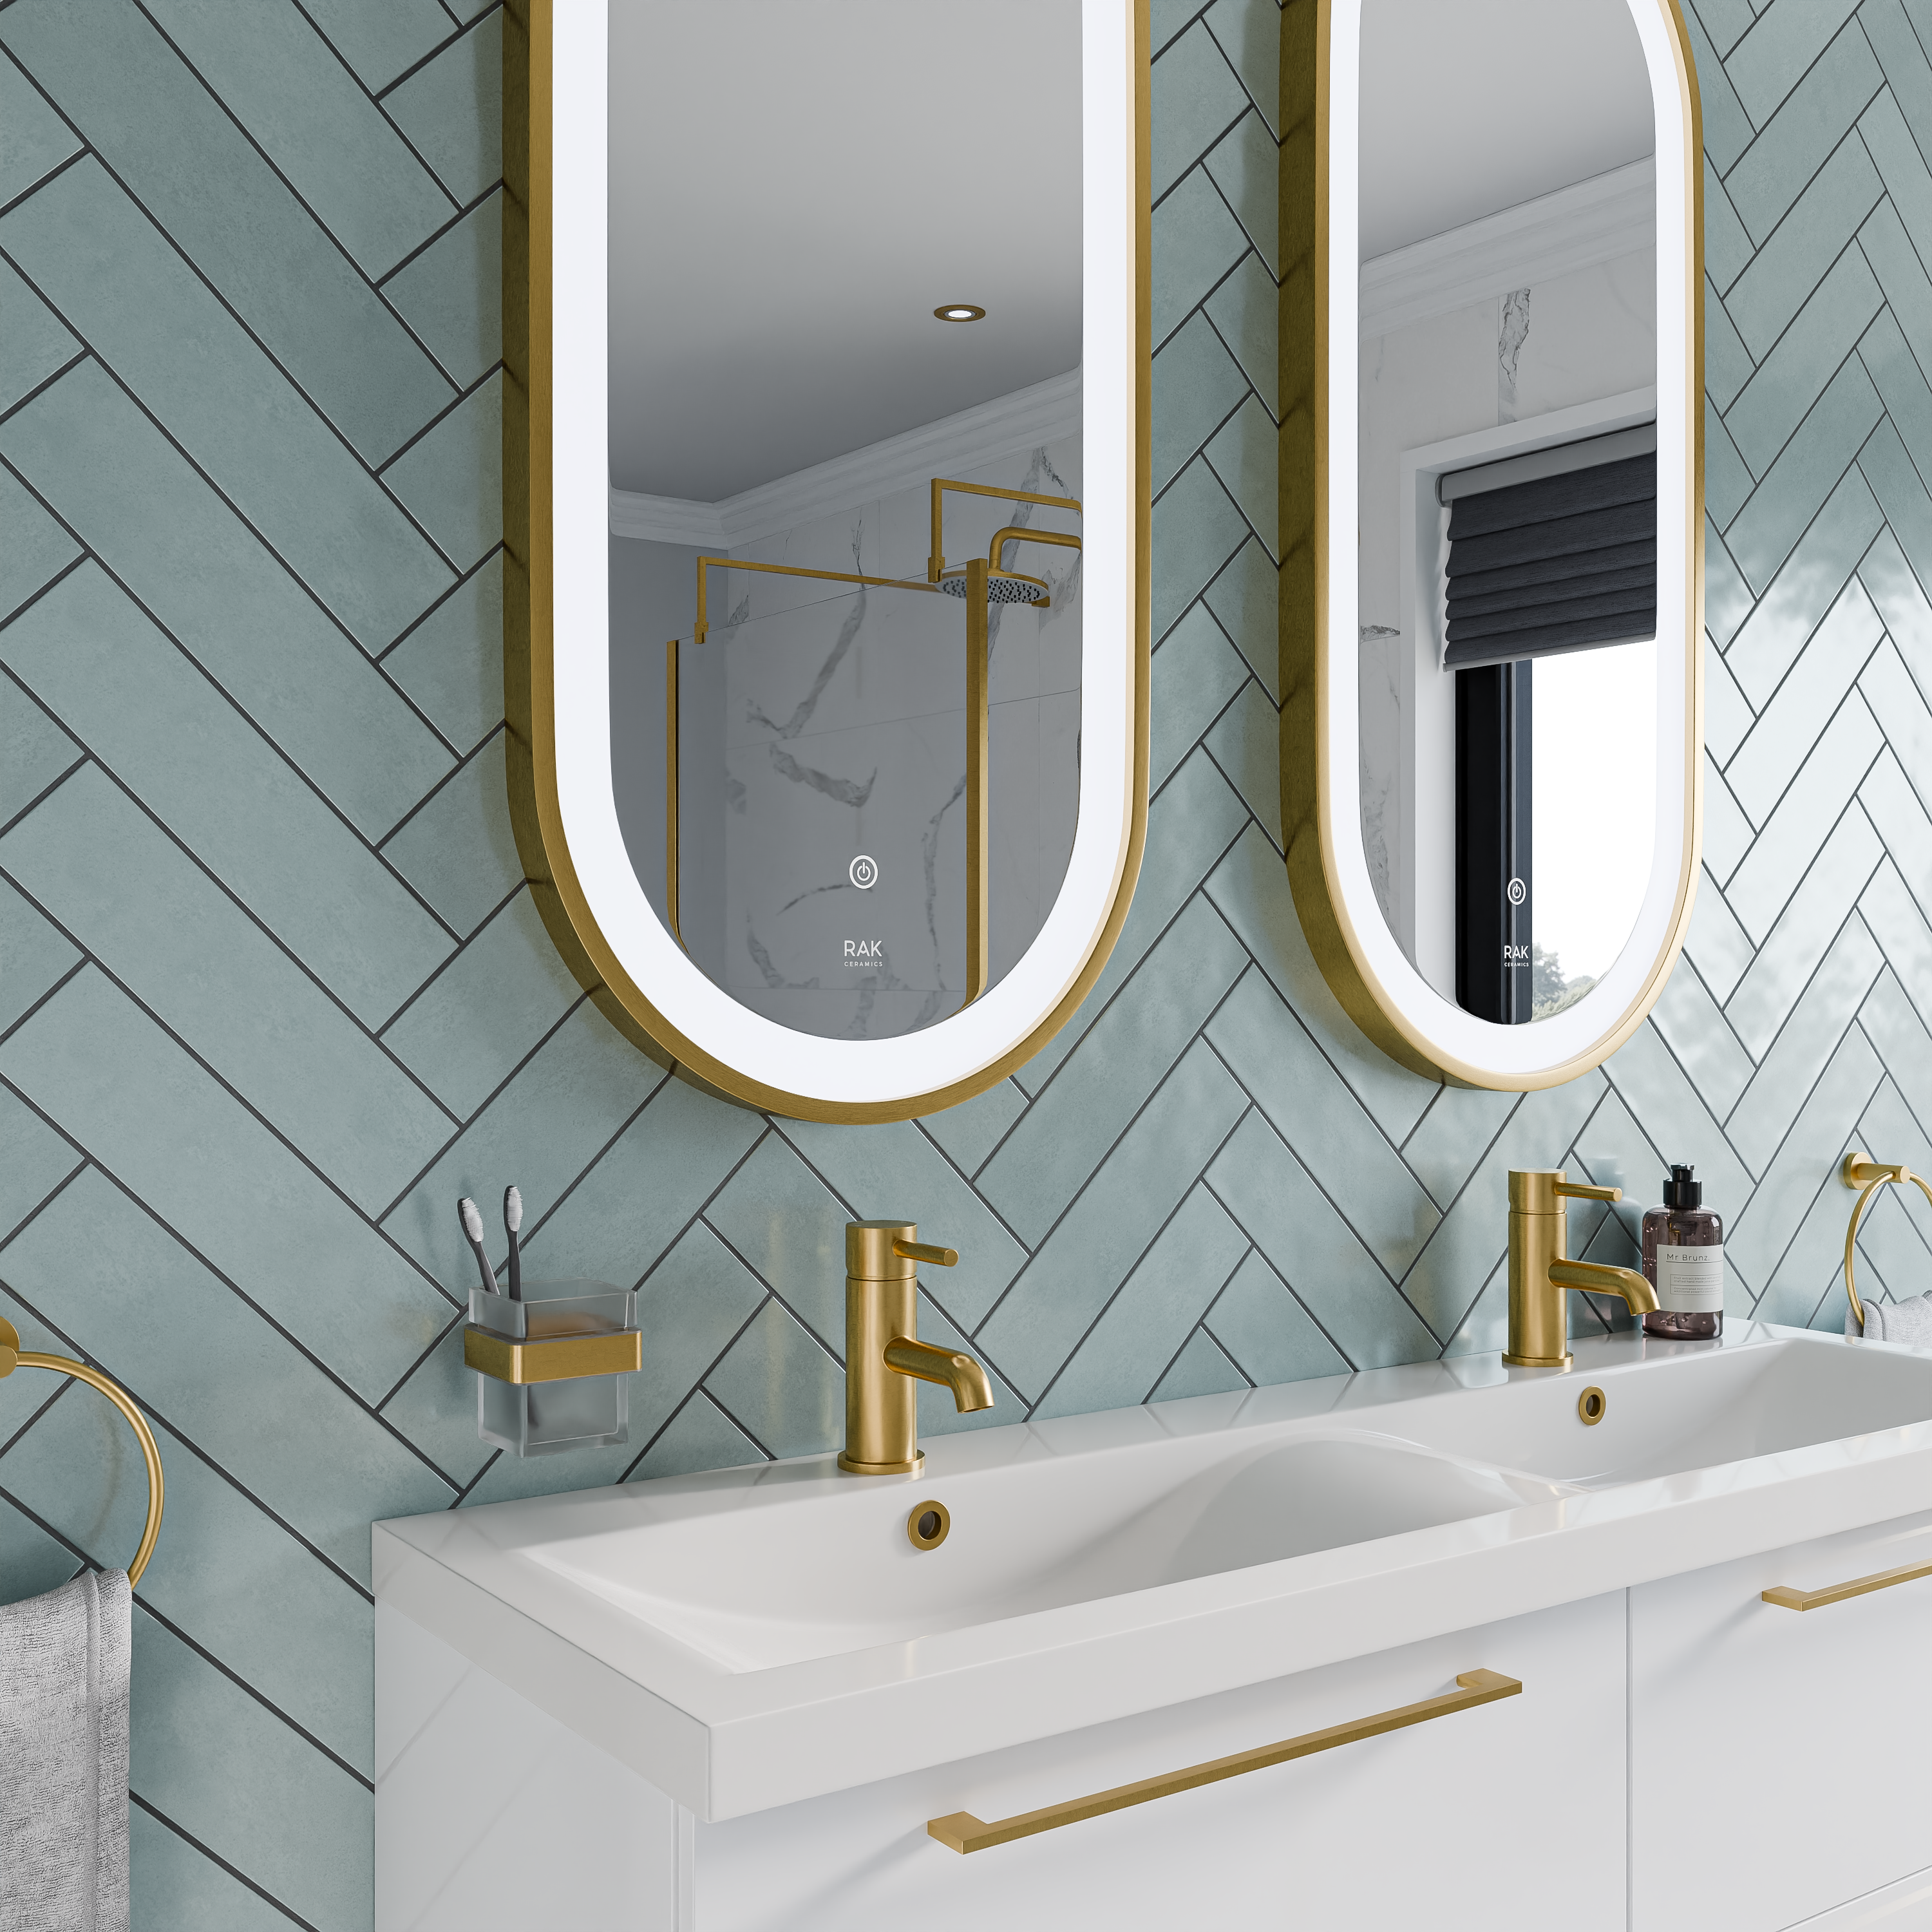 Blue tiles and double mirror bathroom set up